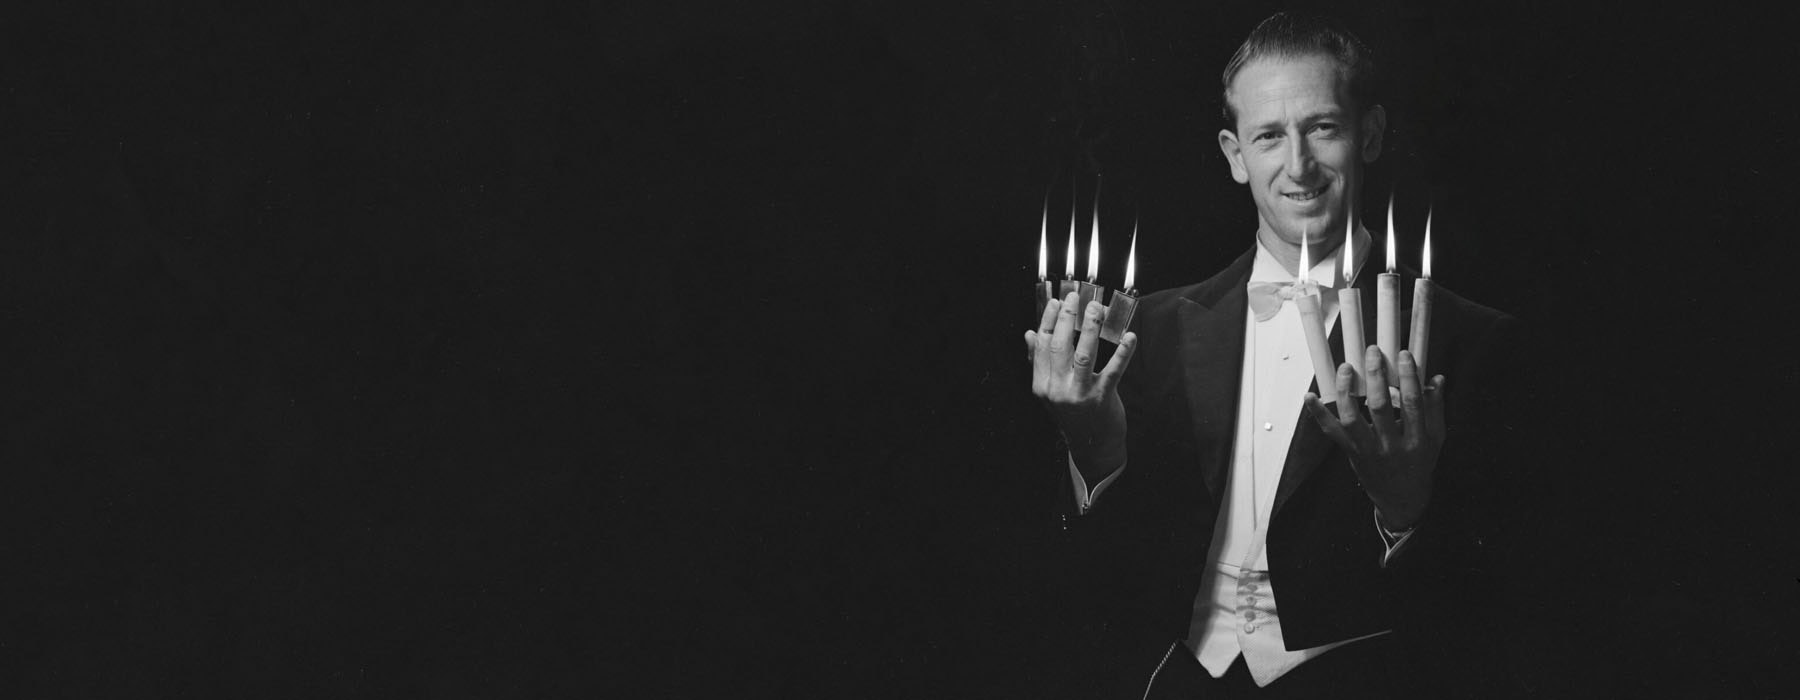 A magician poising for a photo. In his left hand area lit cigarette lighters between each finger. In his right handle, lit candles are held between each finger